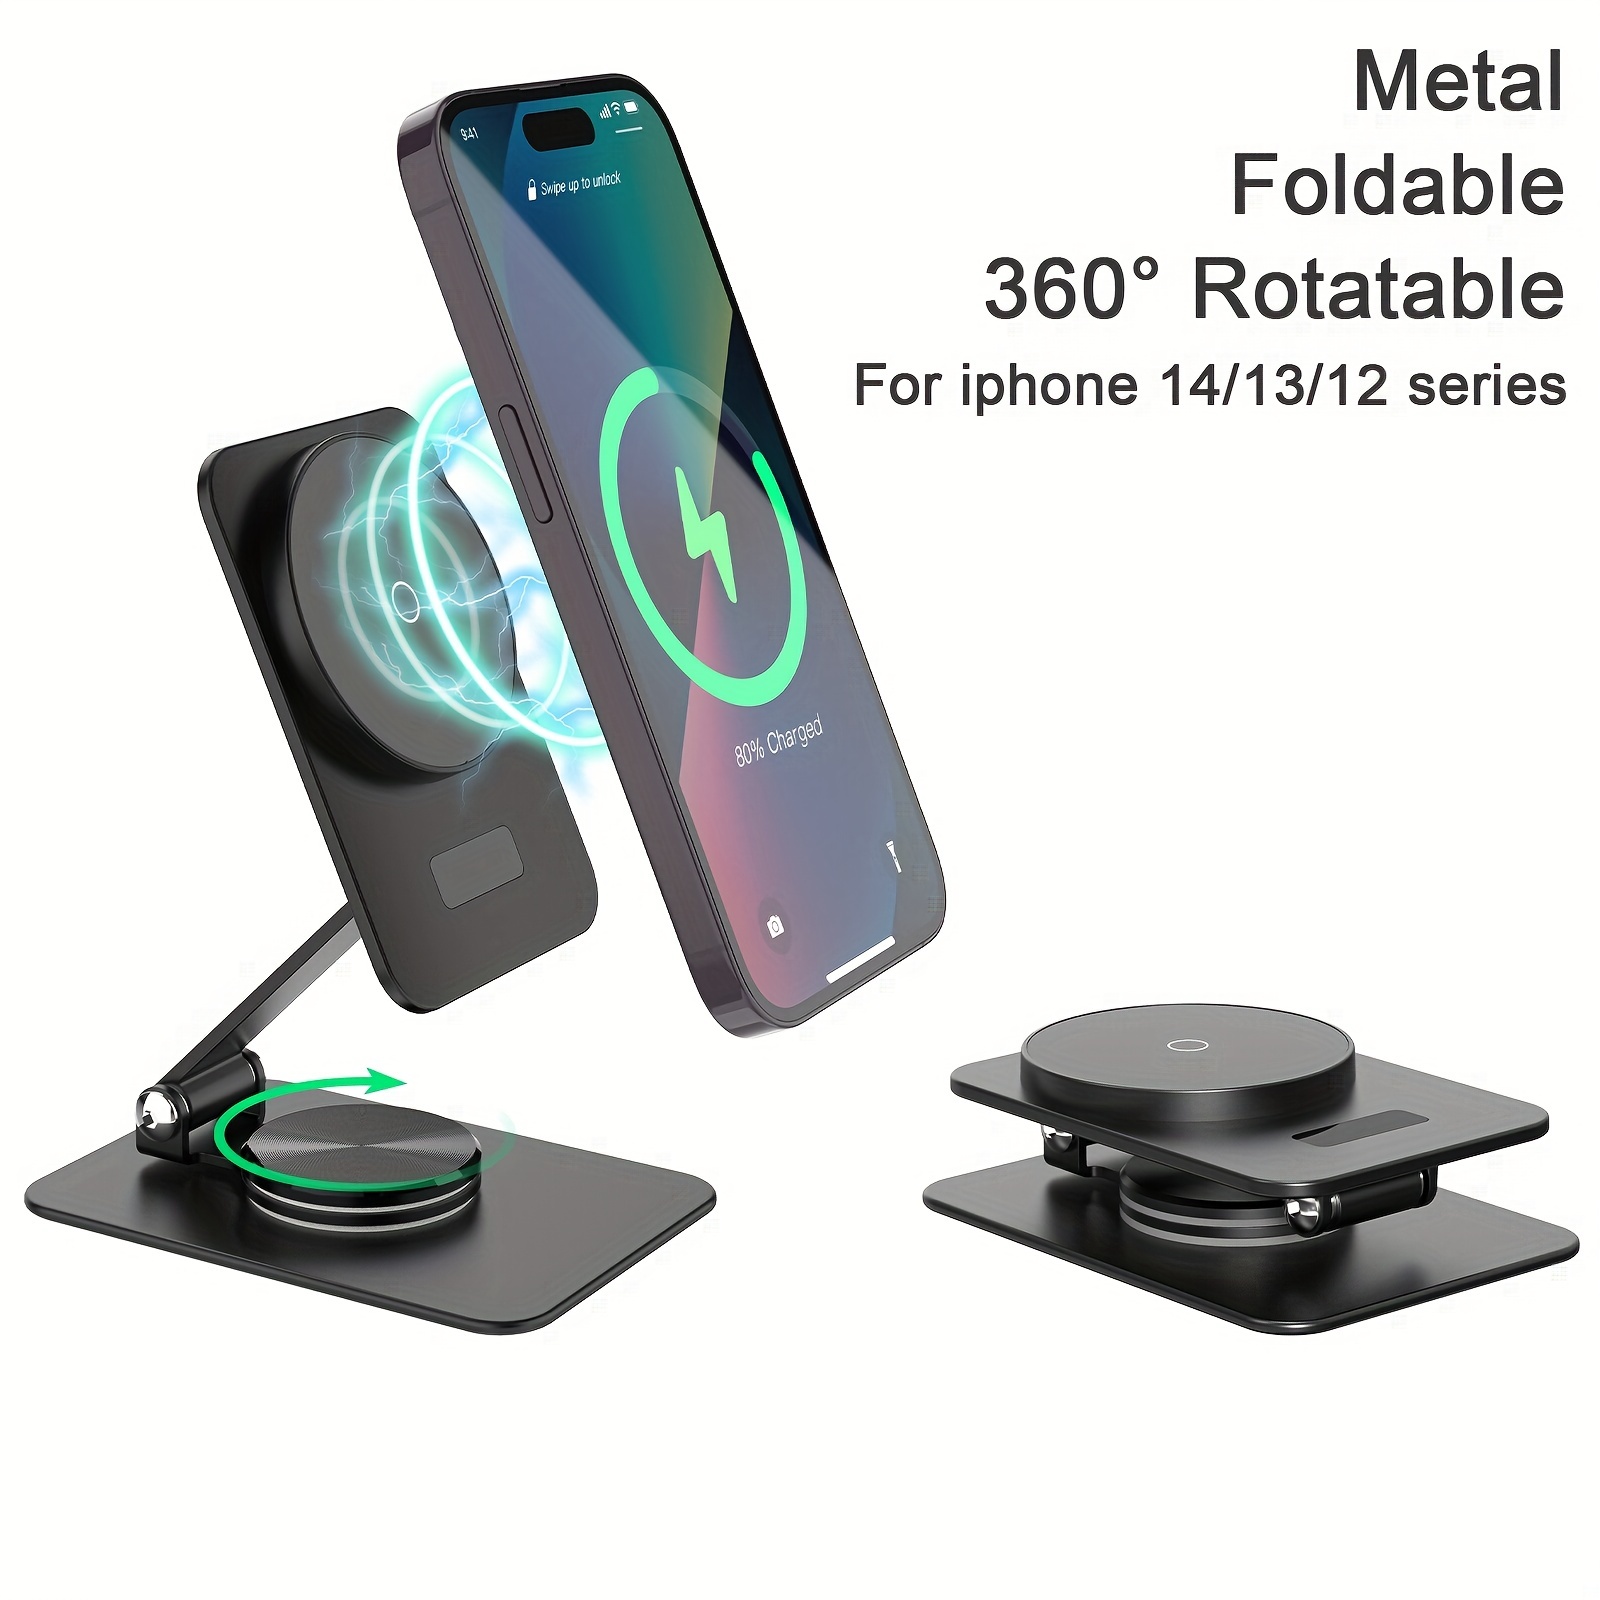 3 in 1 Battery Pack for Apple Watch iPhone, (3000mAh) Magnetic Wireless  Portable Charger for Mag-Safe iPhone 14 Pro Max/13/12, All 8 iWatch Series